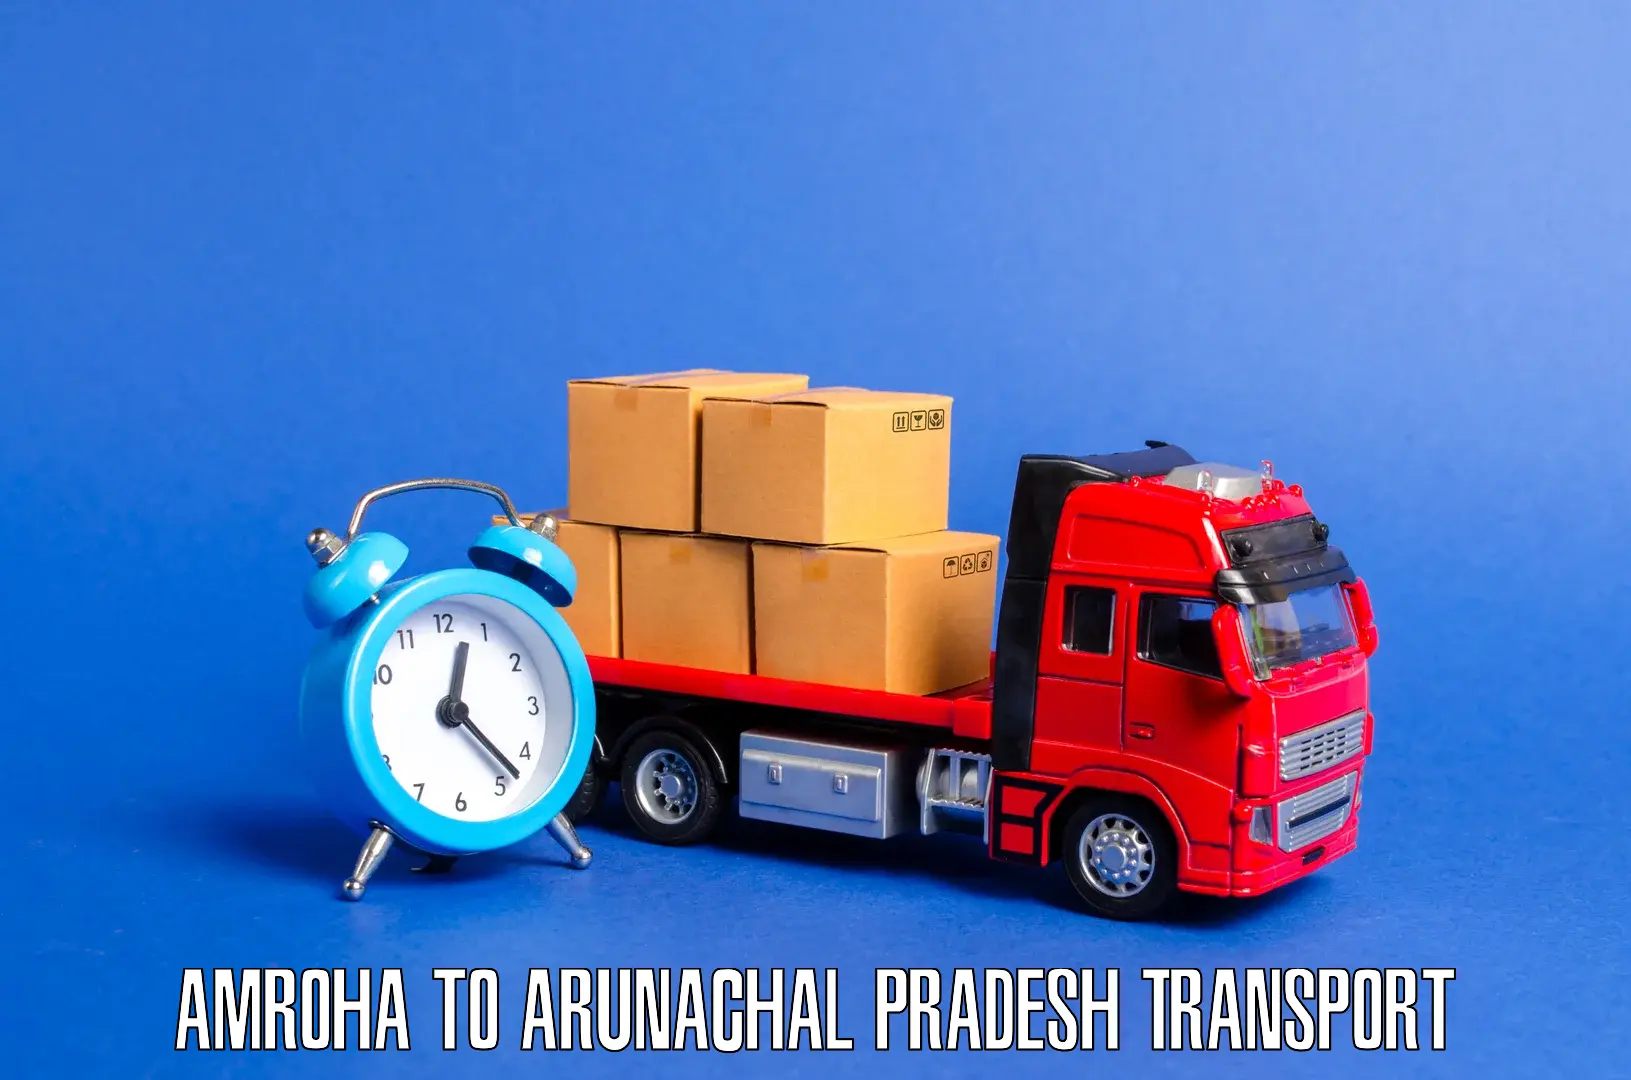 Transport bike from one state to another Amroha to Nirjuli